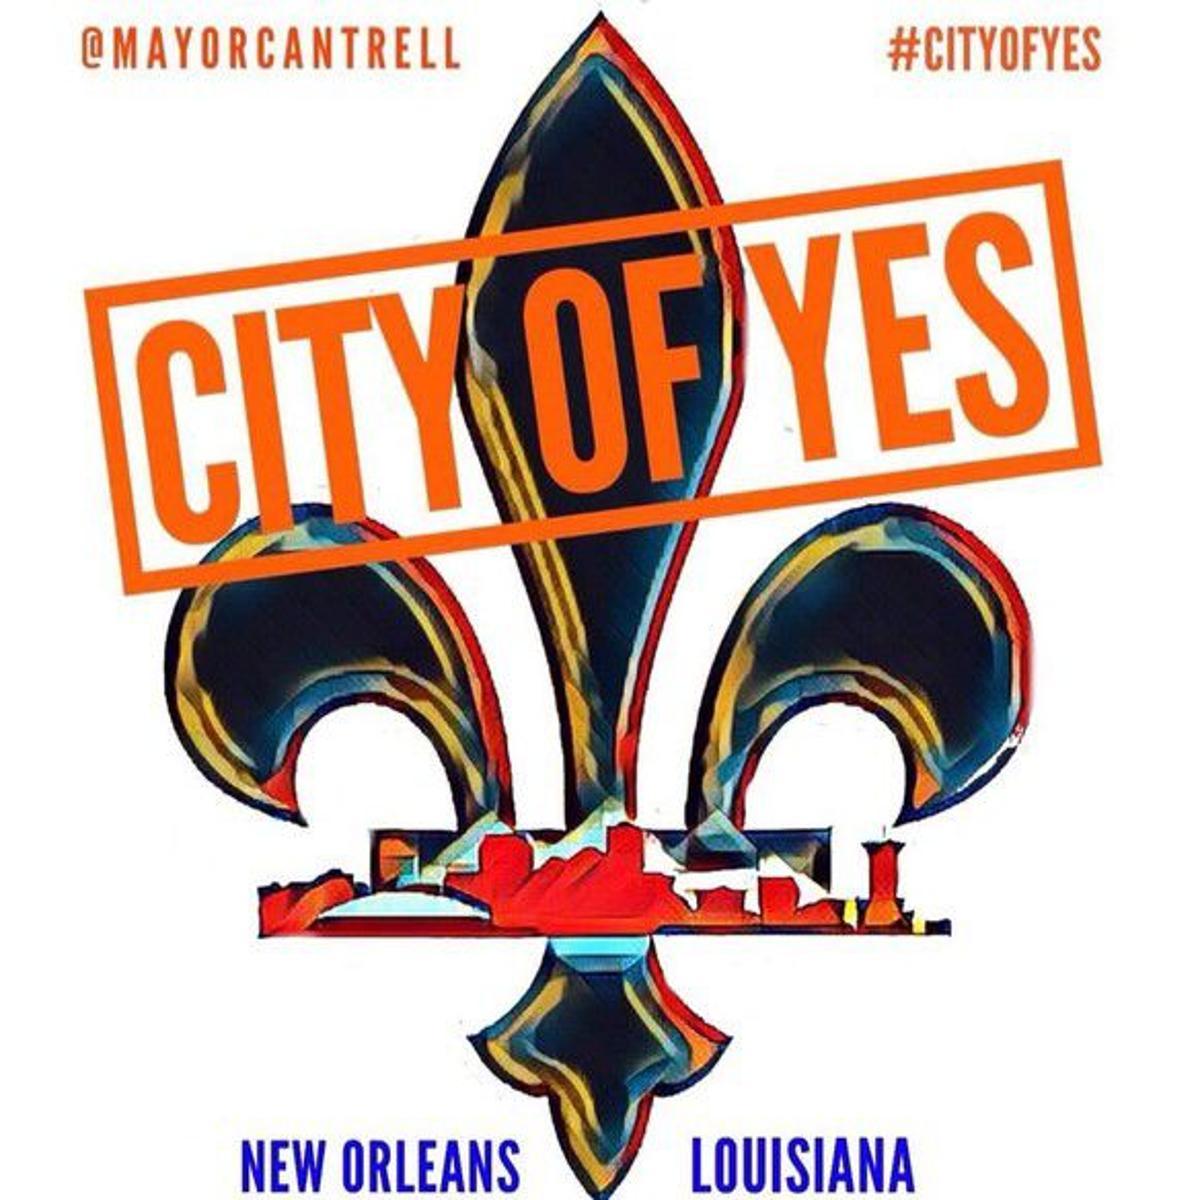 Nola Logo - City of N.O. to 'City of Yes': Cantrell's New Orleans logo debuts ...